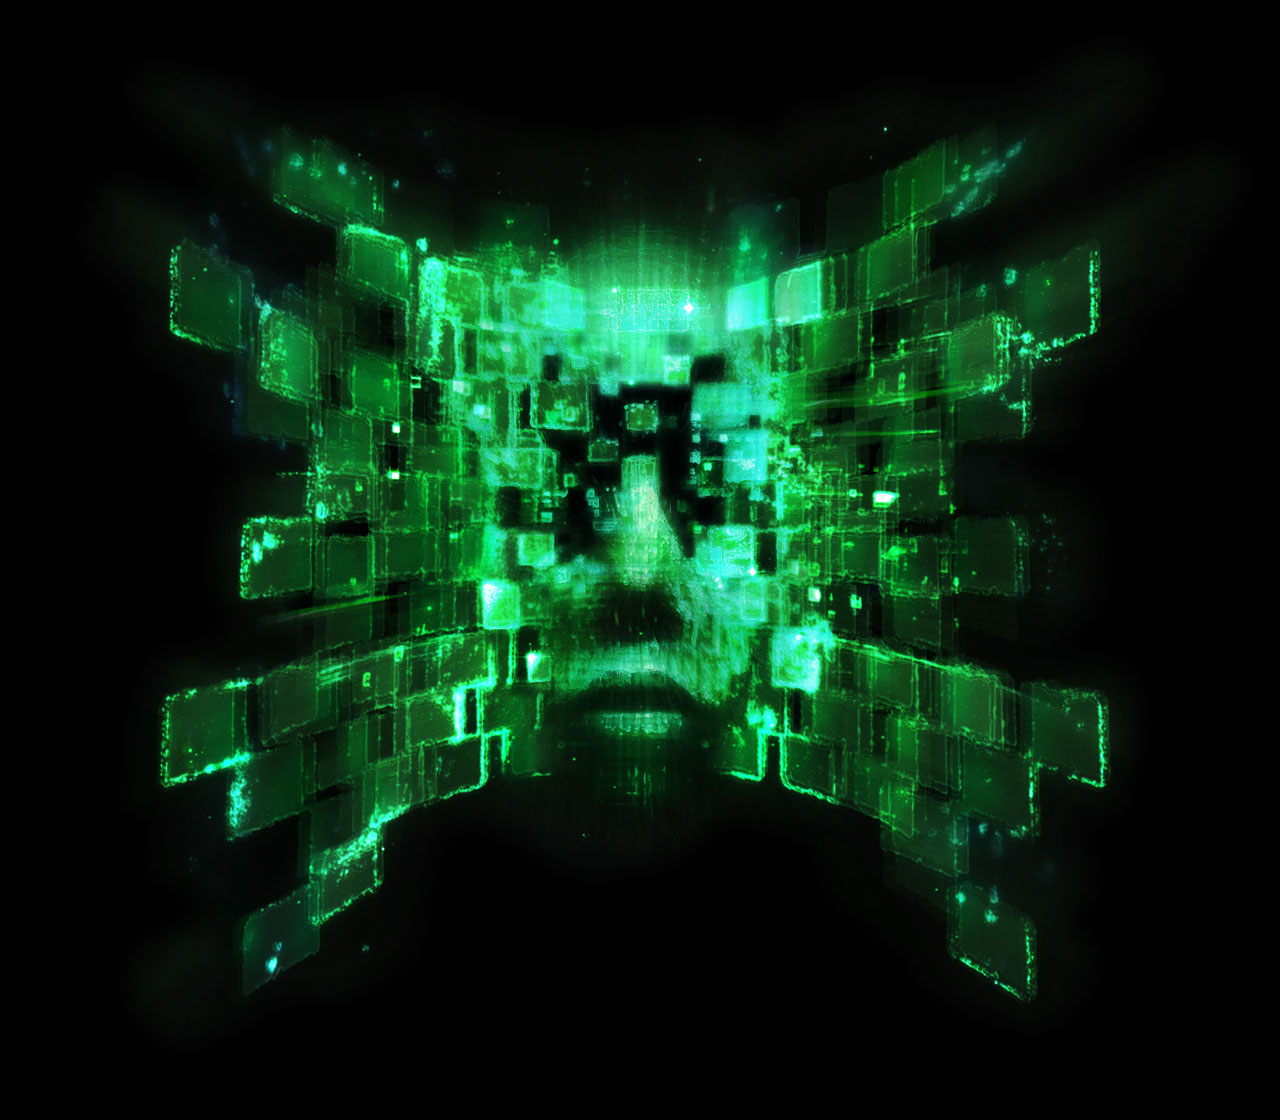 system shock 2 characters